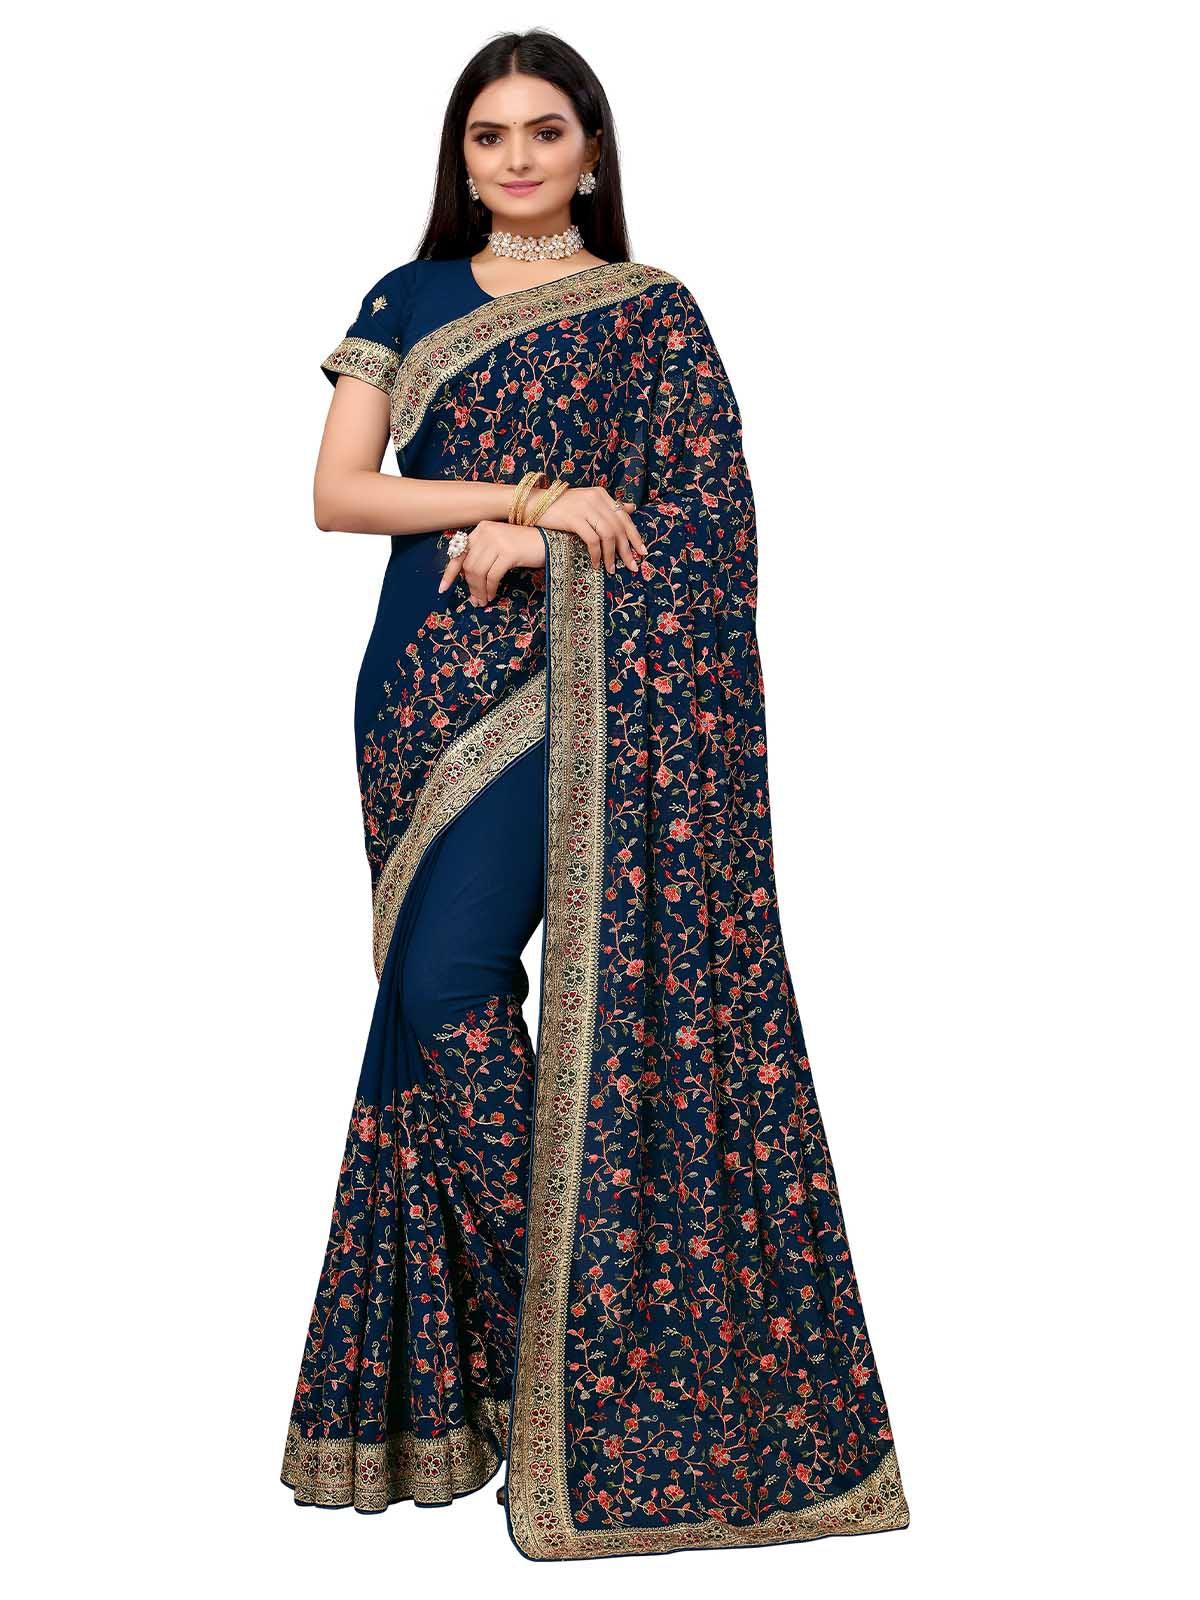 Women's Dark Blue Poly Georgette Embroidered Saree With Blouse - Odette